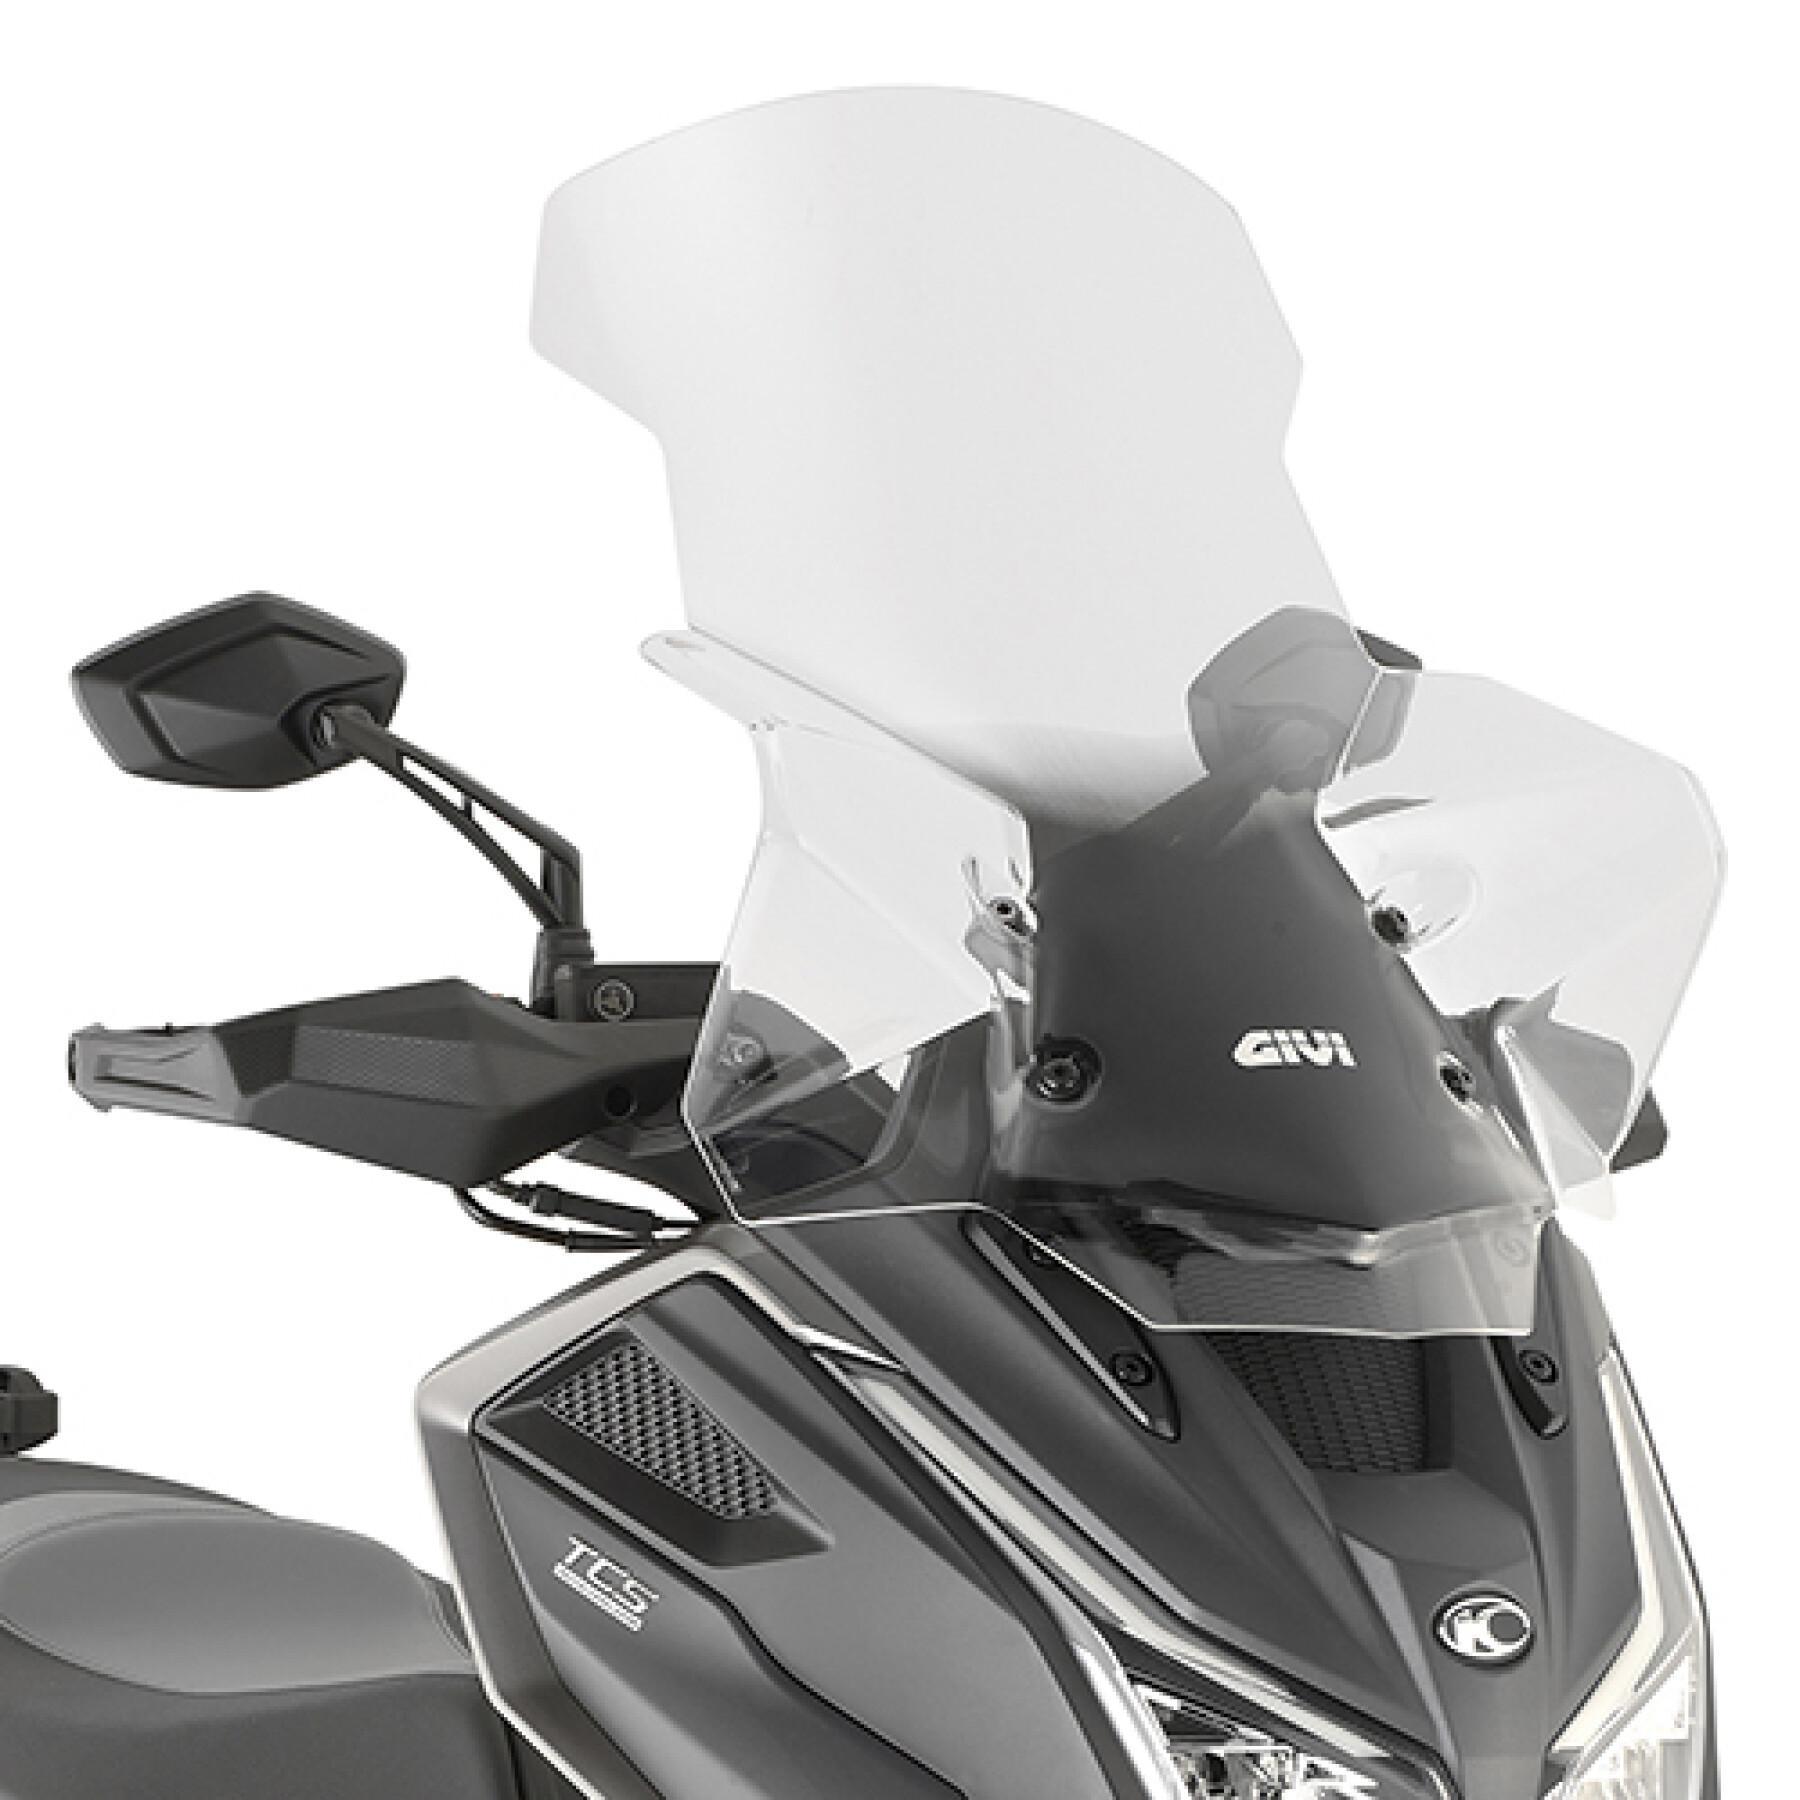 Scooter windshield Givi Kymco Dtx360